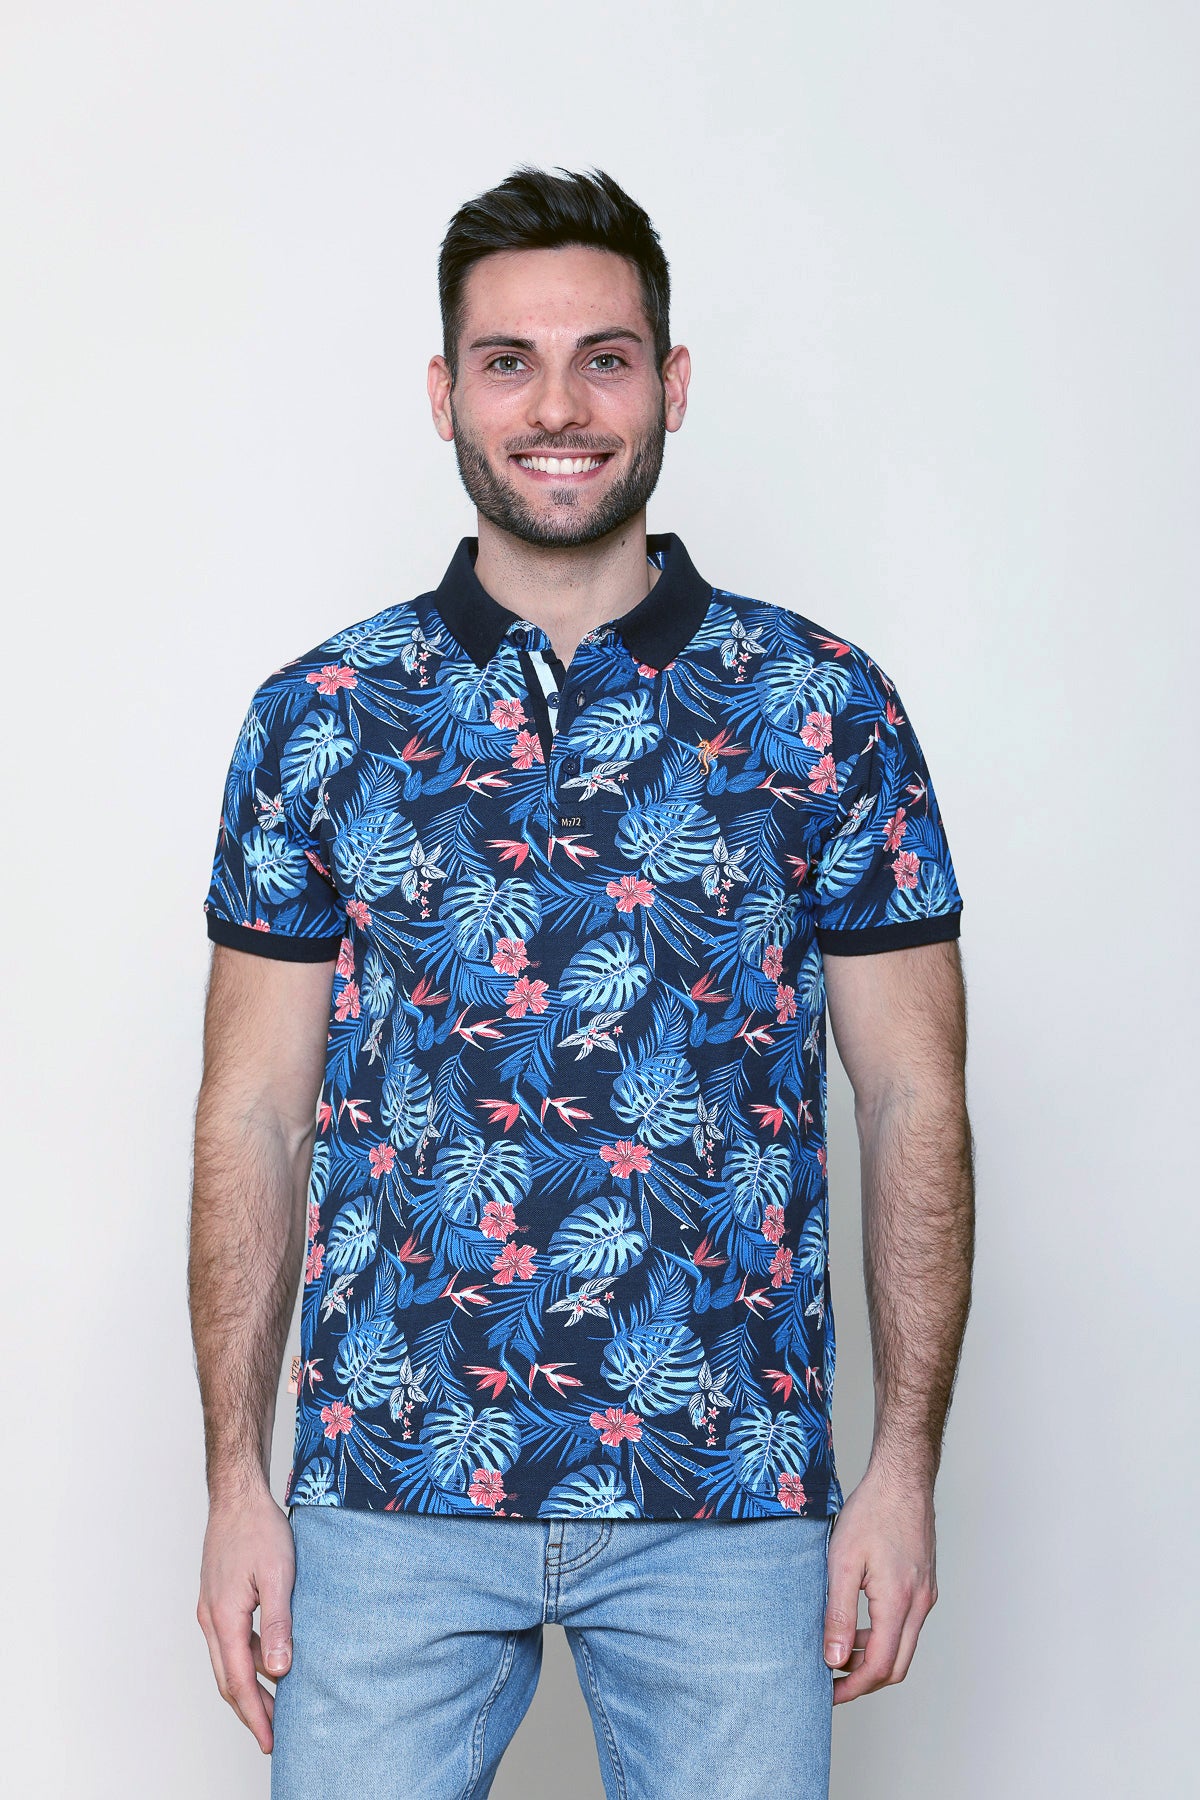 Men's polo shirt in a tropical pattern by MZ72